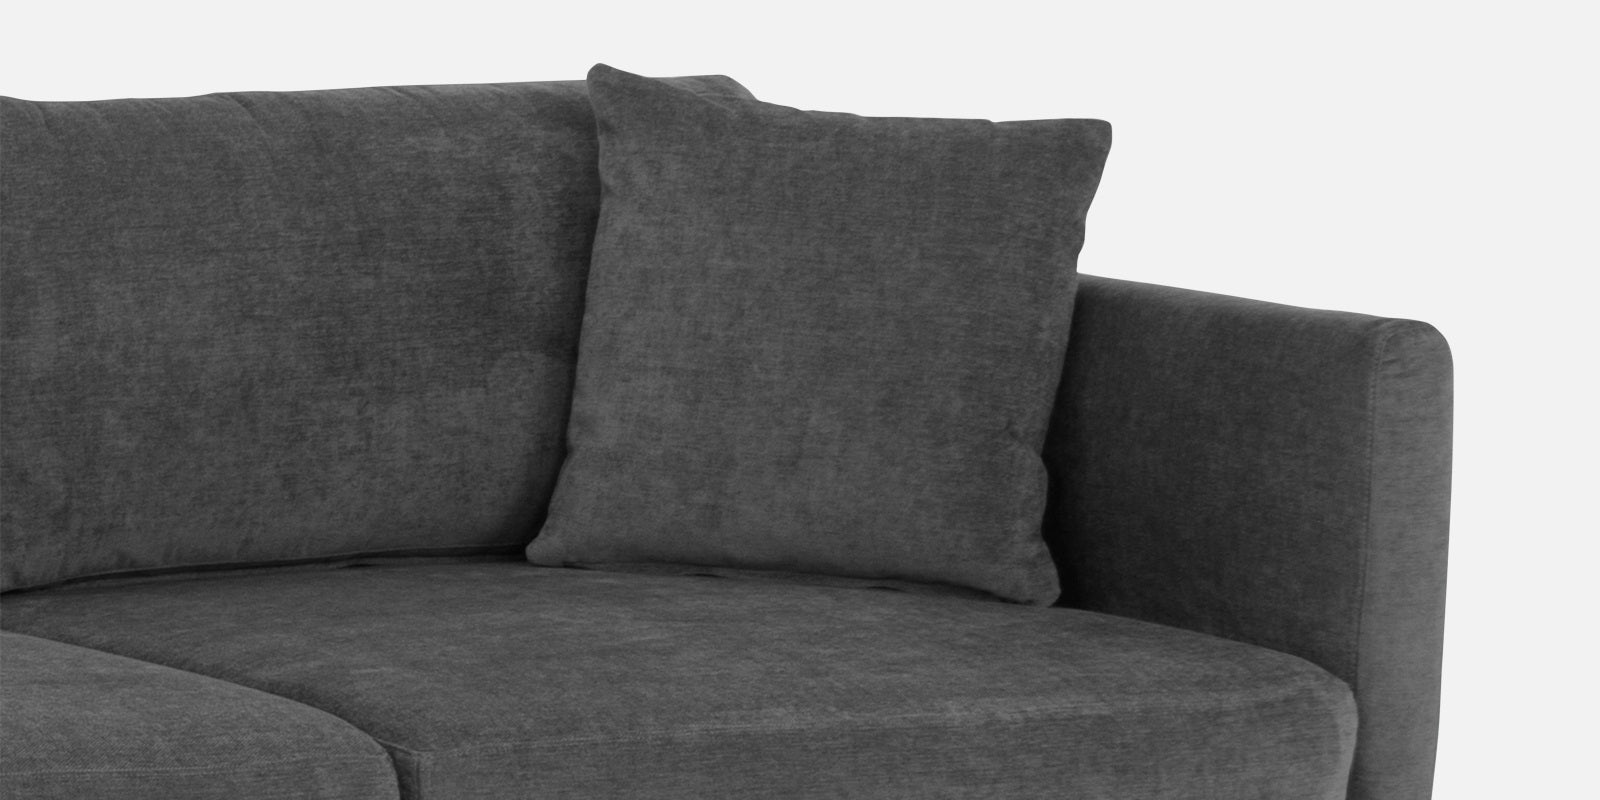 Northern Fabric RHS Sectional Sofa (3+Lounger) in Charcoal grey Colour